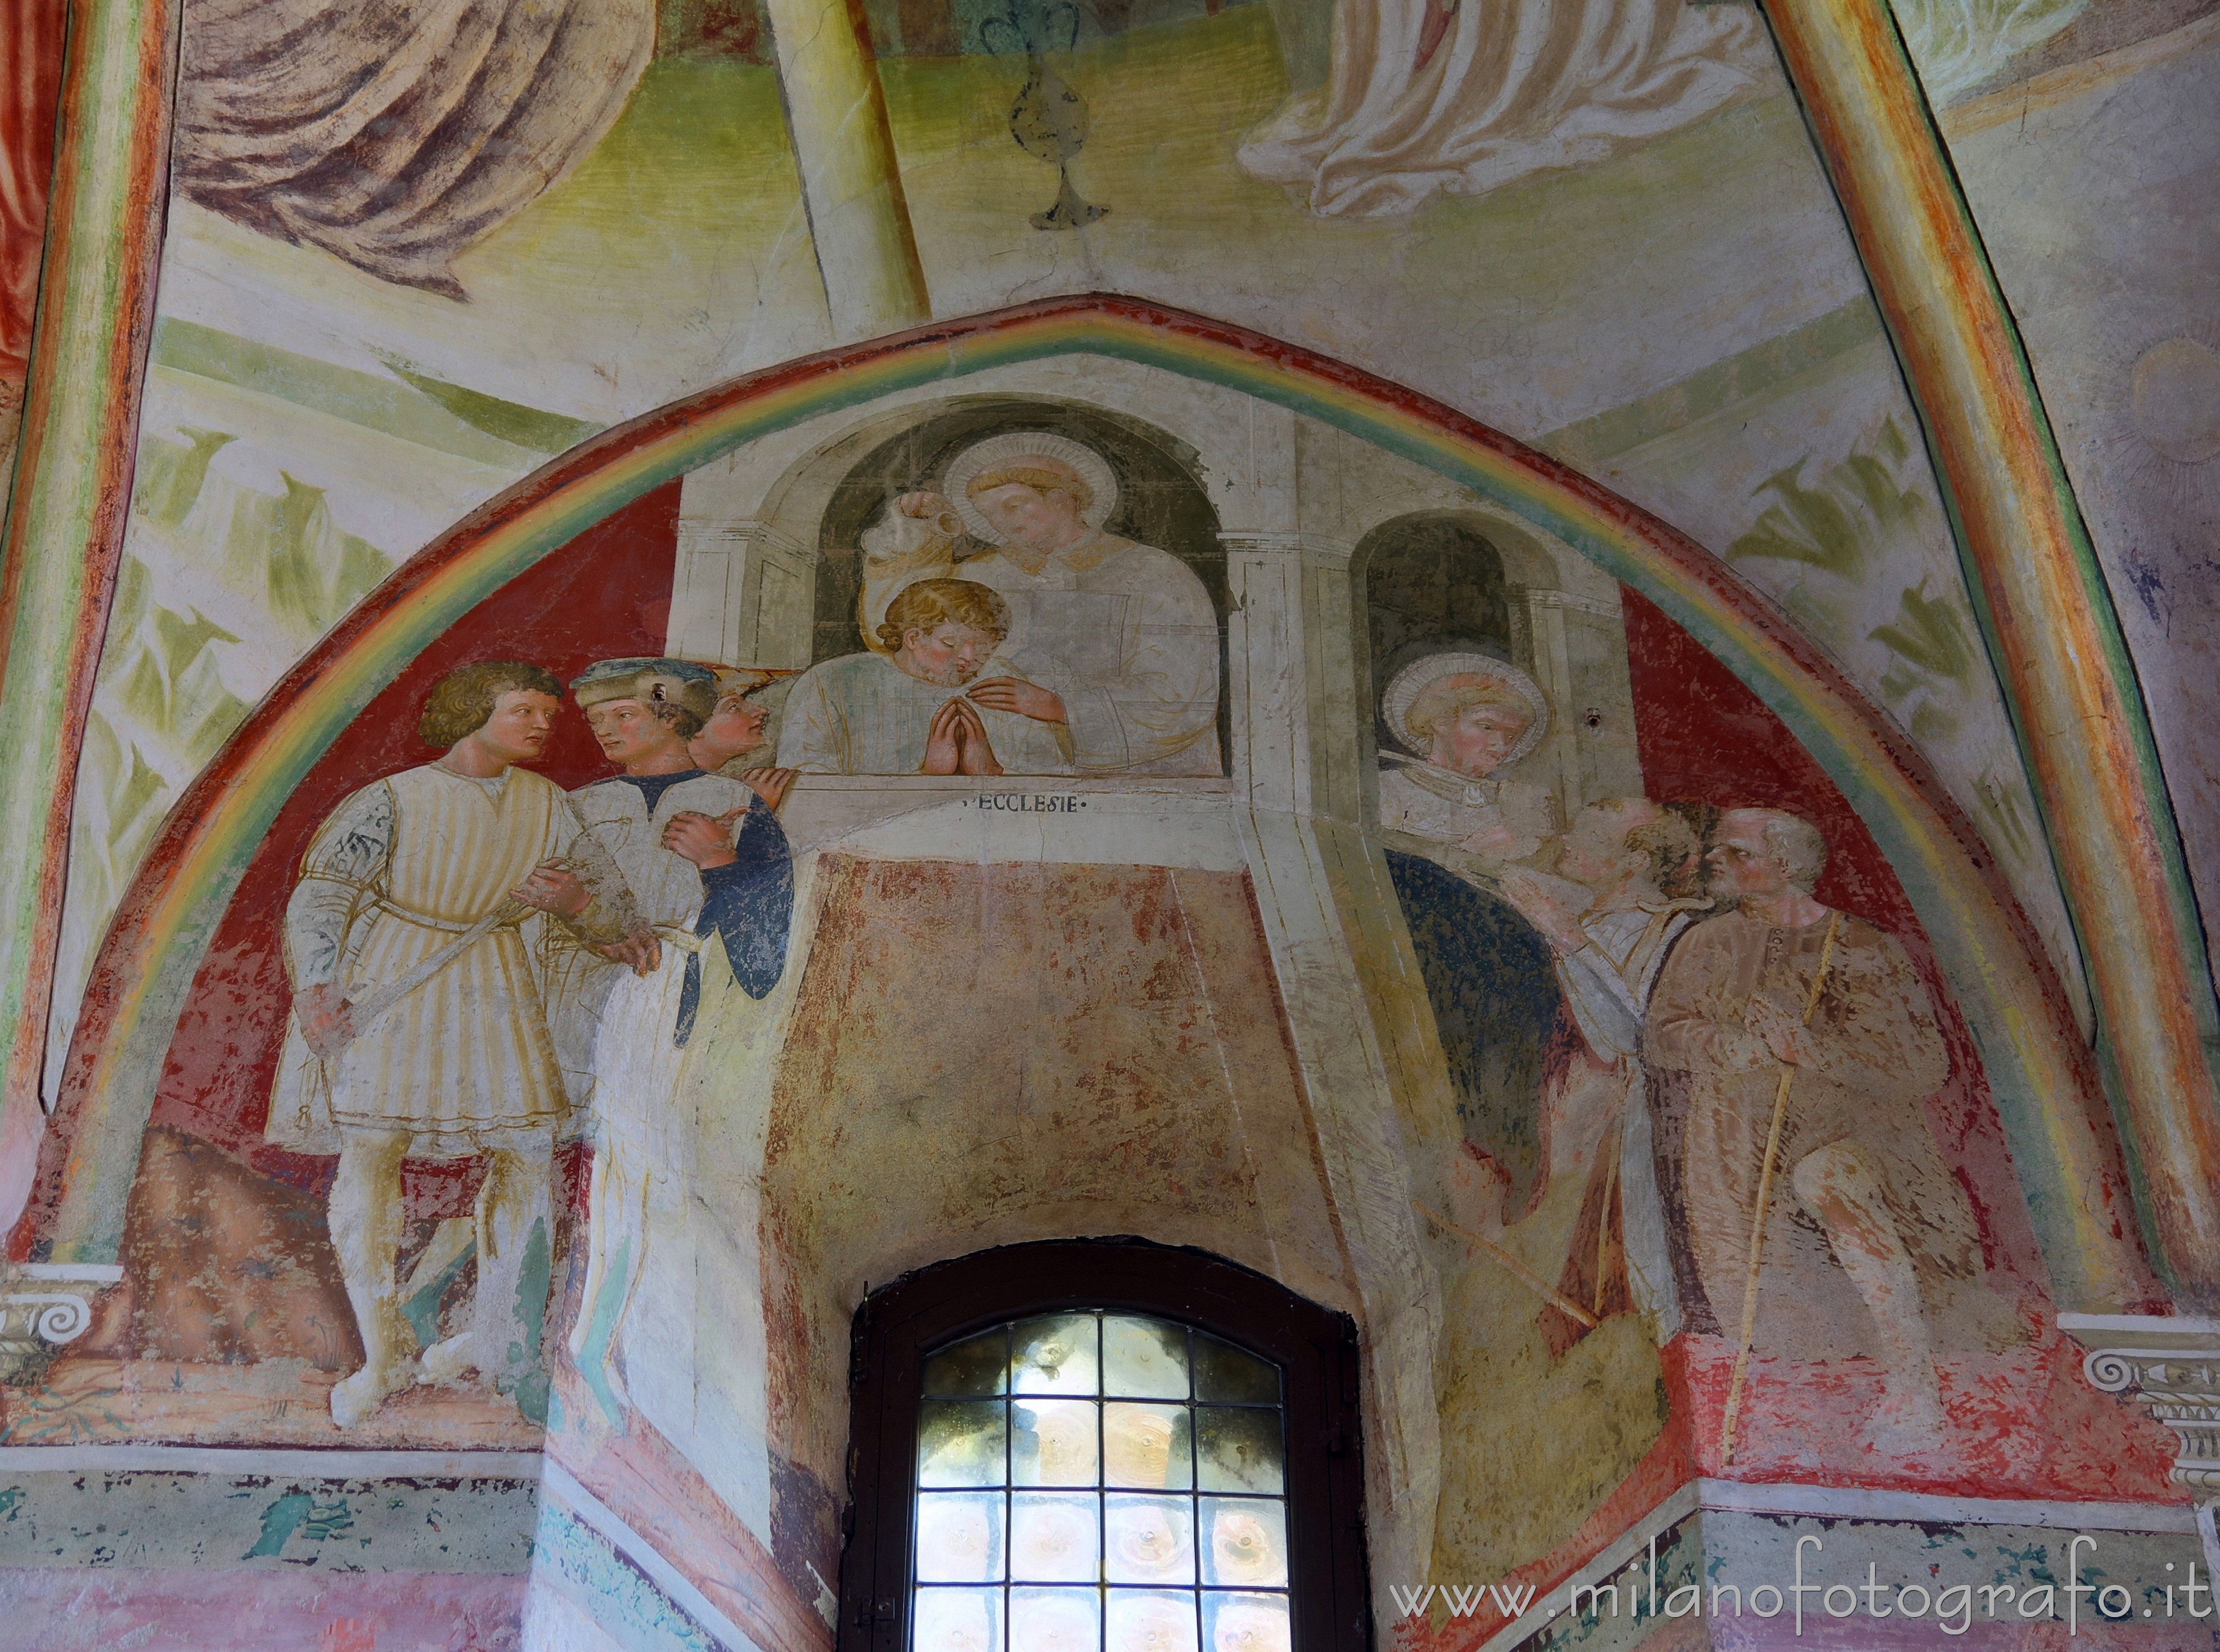 Castiglione Olona (Varese, Italy): Frescoes around a window of the apse of the Collegiate Church of Saints Stephen and Lawrence - Castiglione Olona (Varese, Italy)